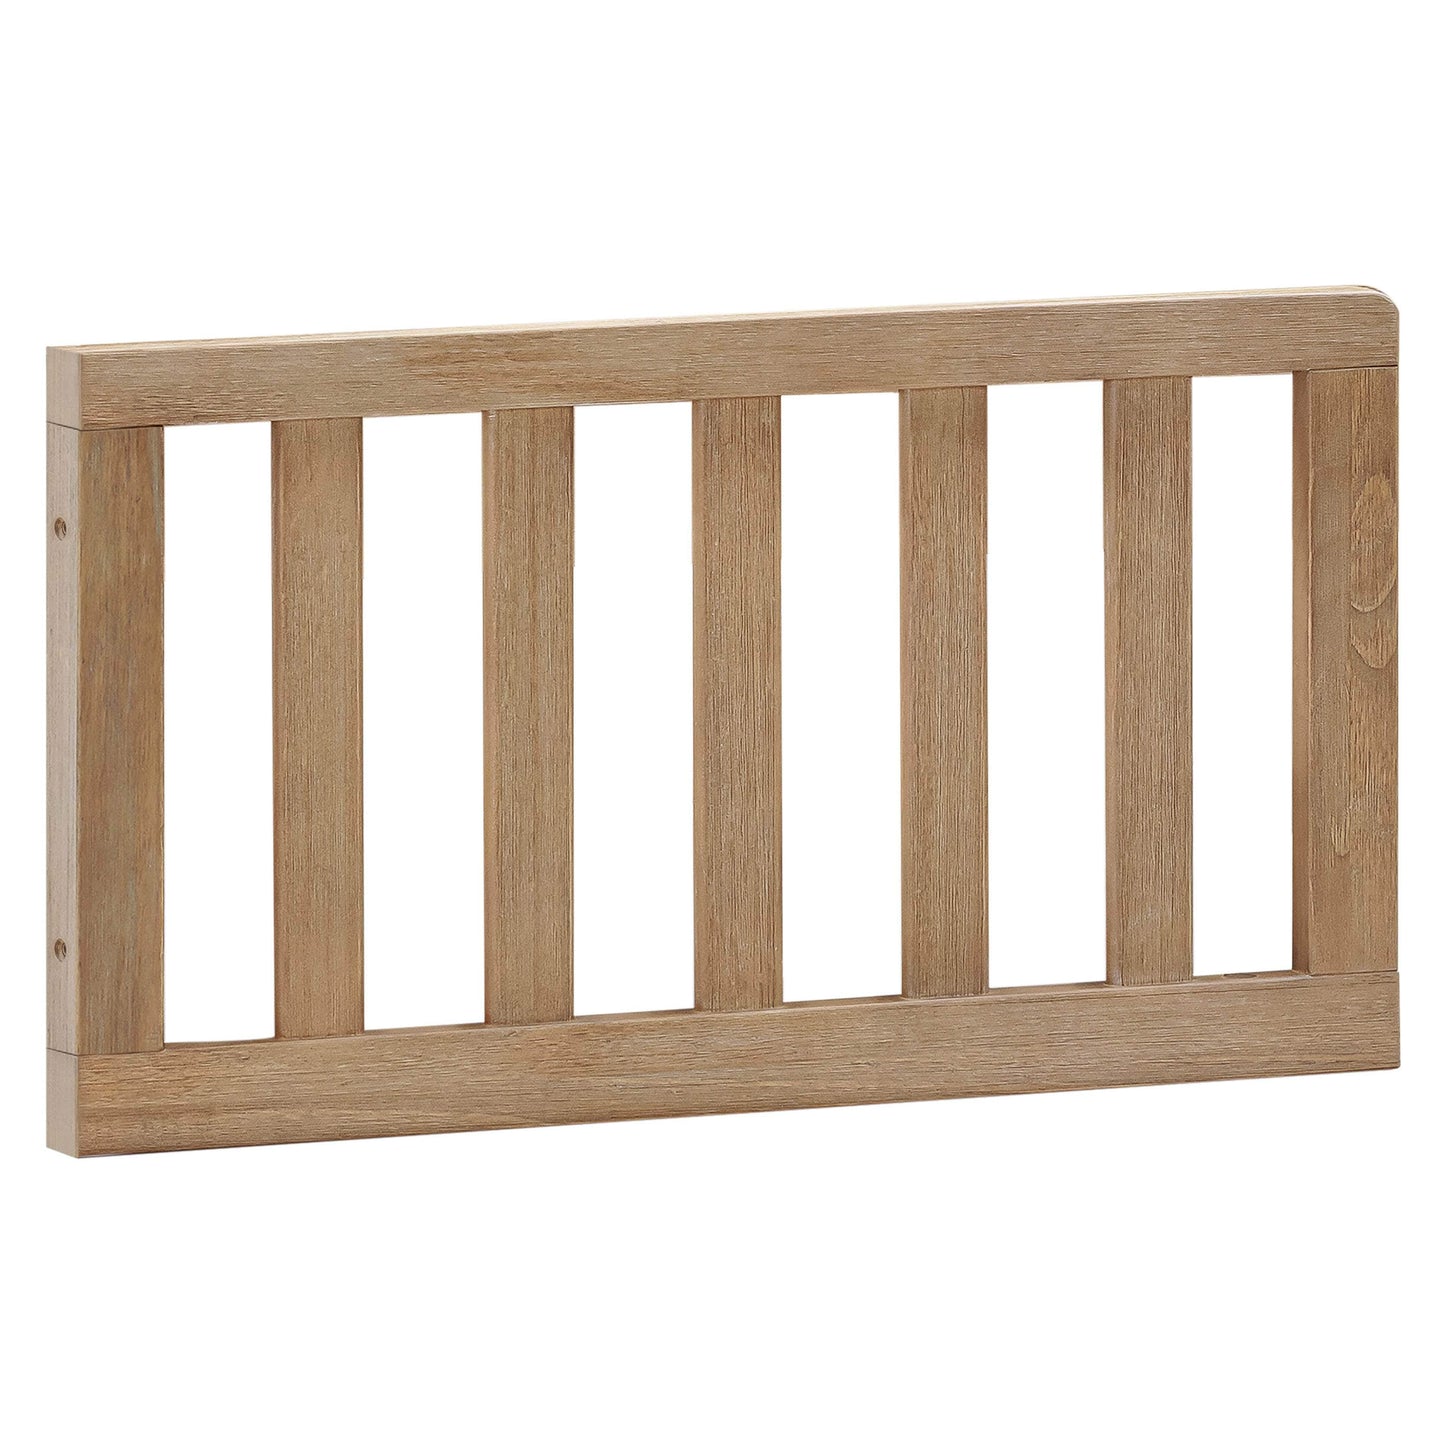 M20799DF,Toddler Bed Conversion Kit in Driftwood